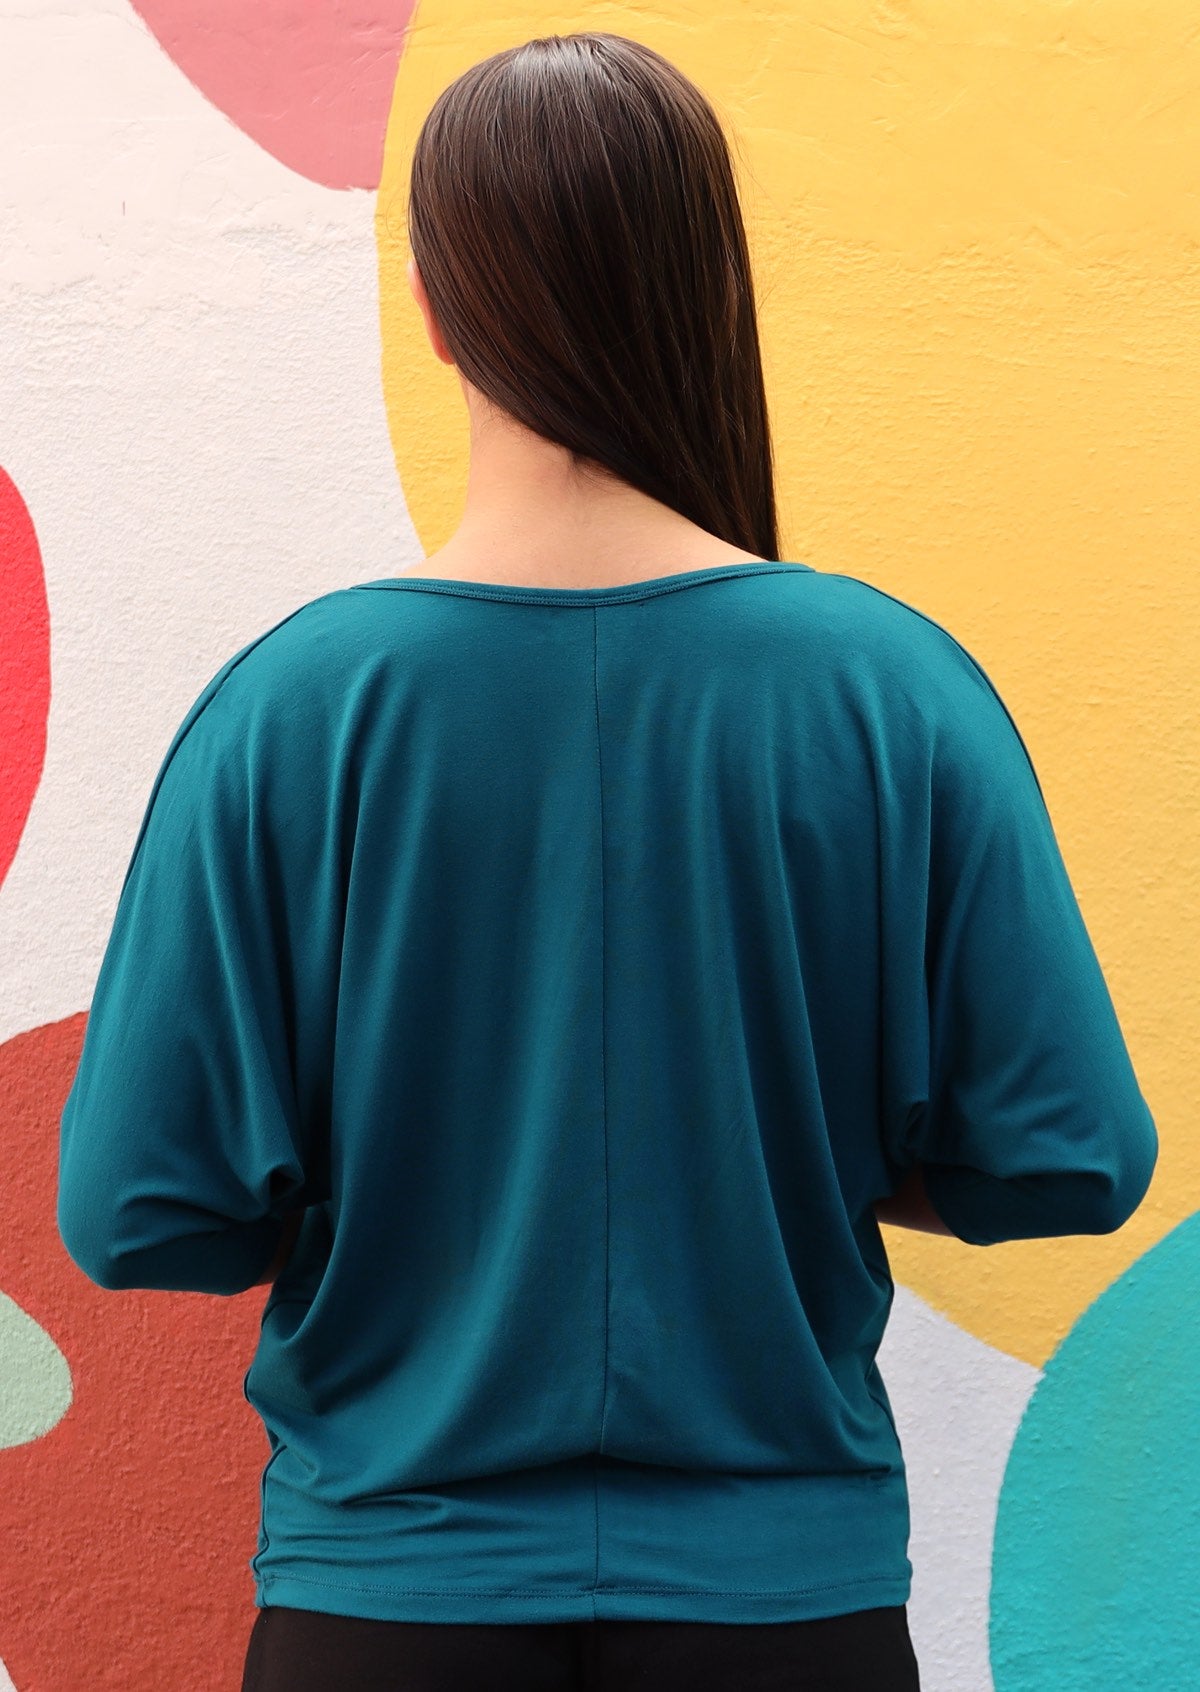 Back view of woman wearing 3/4 sleeve rayon batwing v-neck teal top.